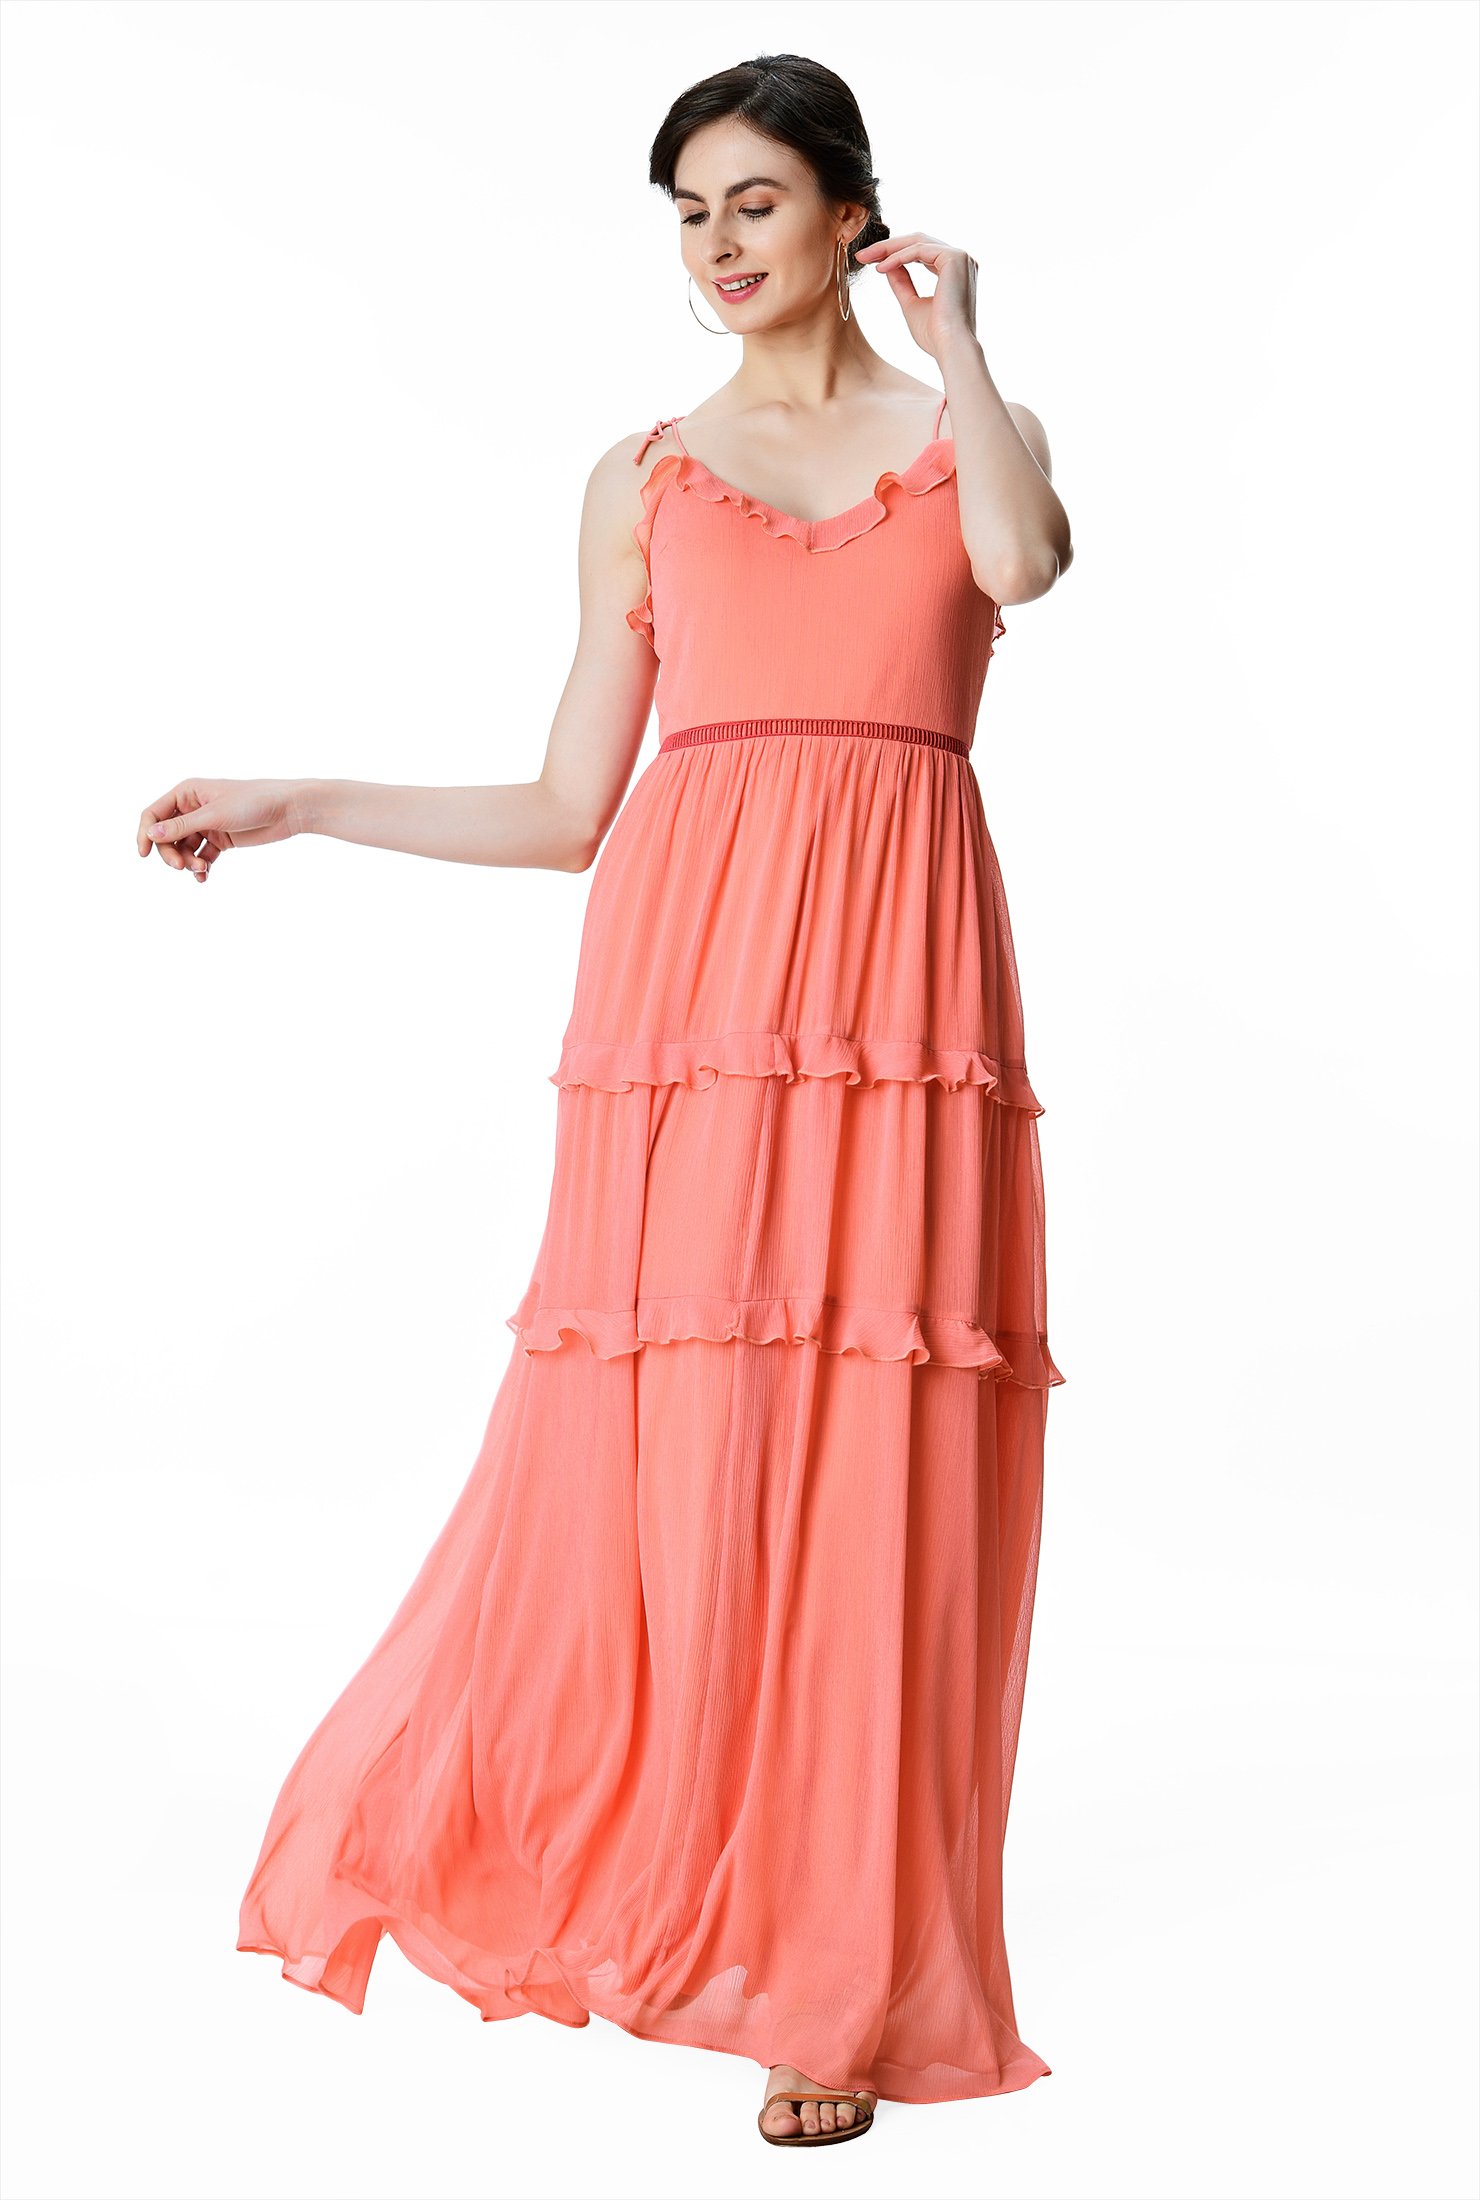 A delight for the eye, our romantic chiffon maxi dress is trimmed with frilly ruffles at the neckline and flouncy tiers and cinched in at the seamed waist with lattice trim.